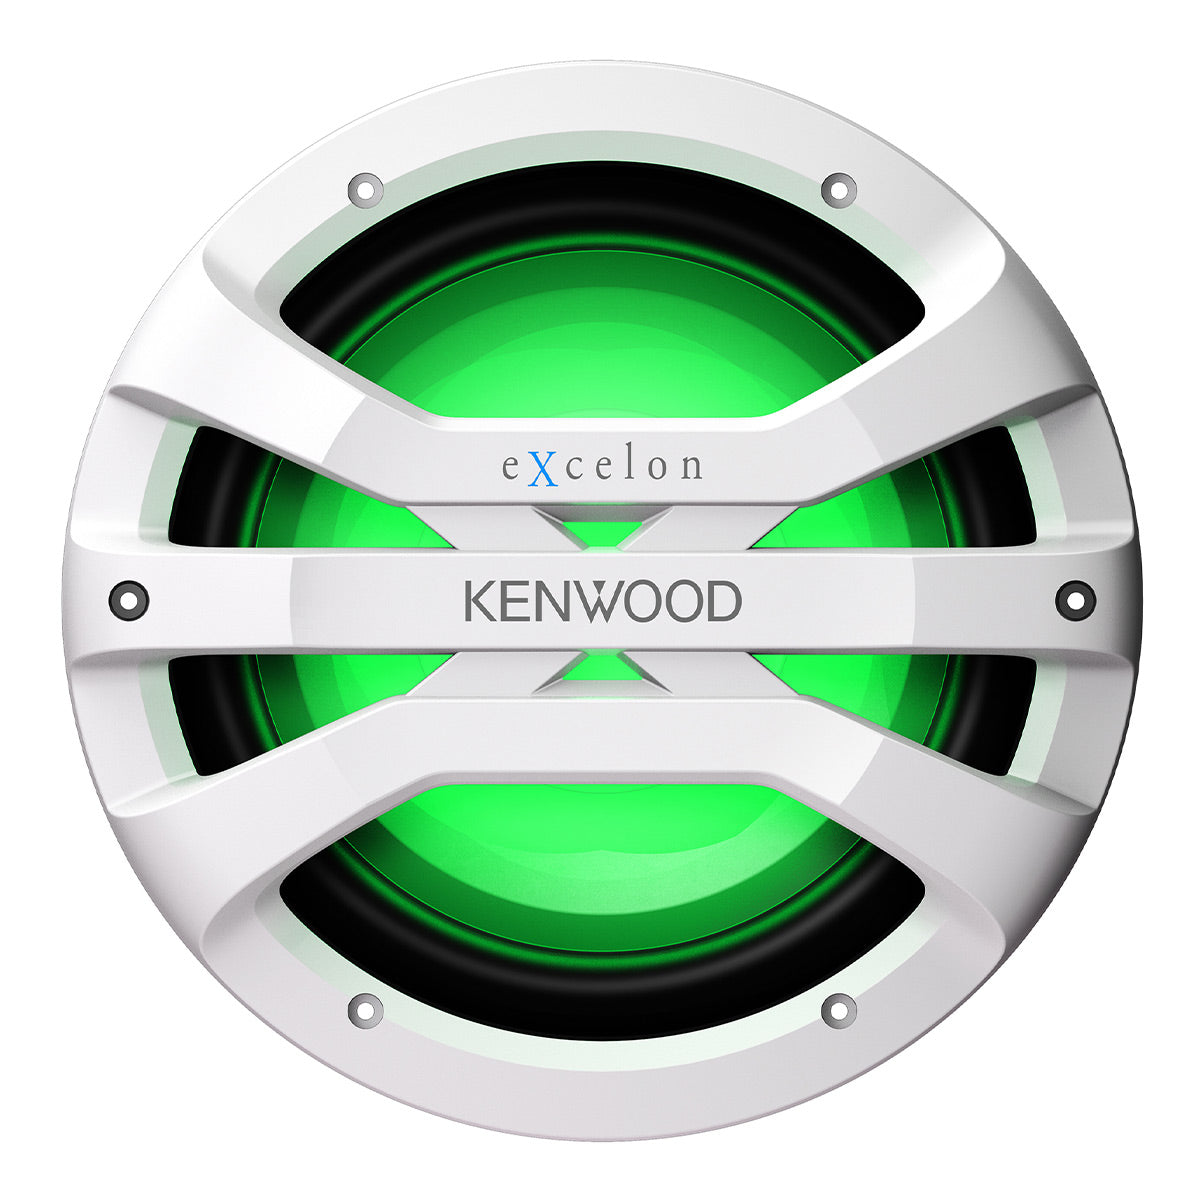 Kenwood XM1041BL eXcelon Motorsports 10" All-Weather Outdoor Subwoofer with Adjustable Lighting - Each (White)